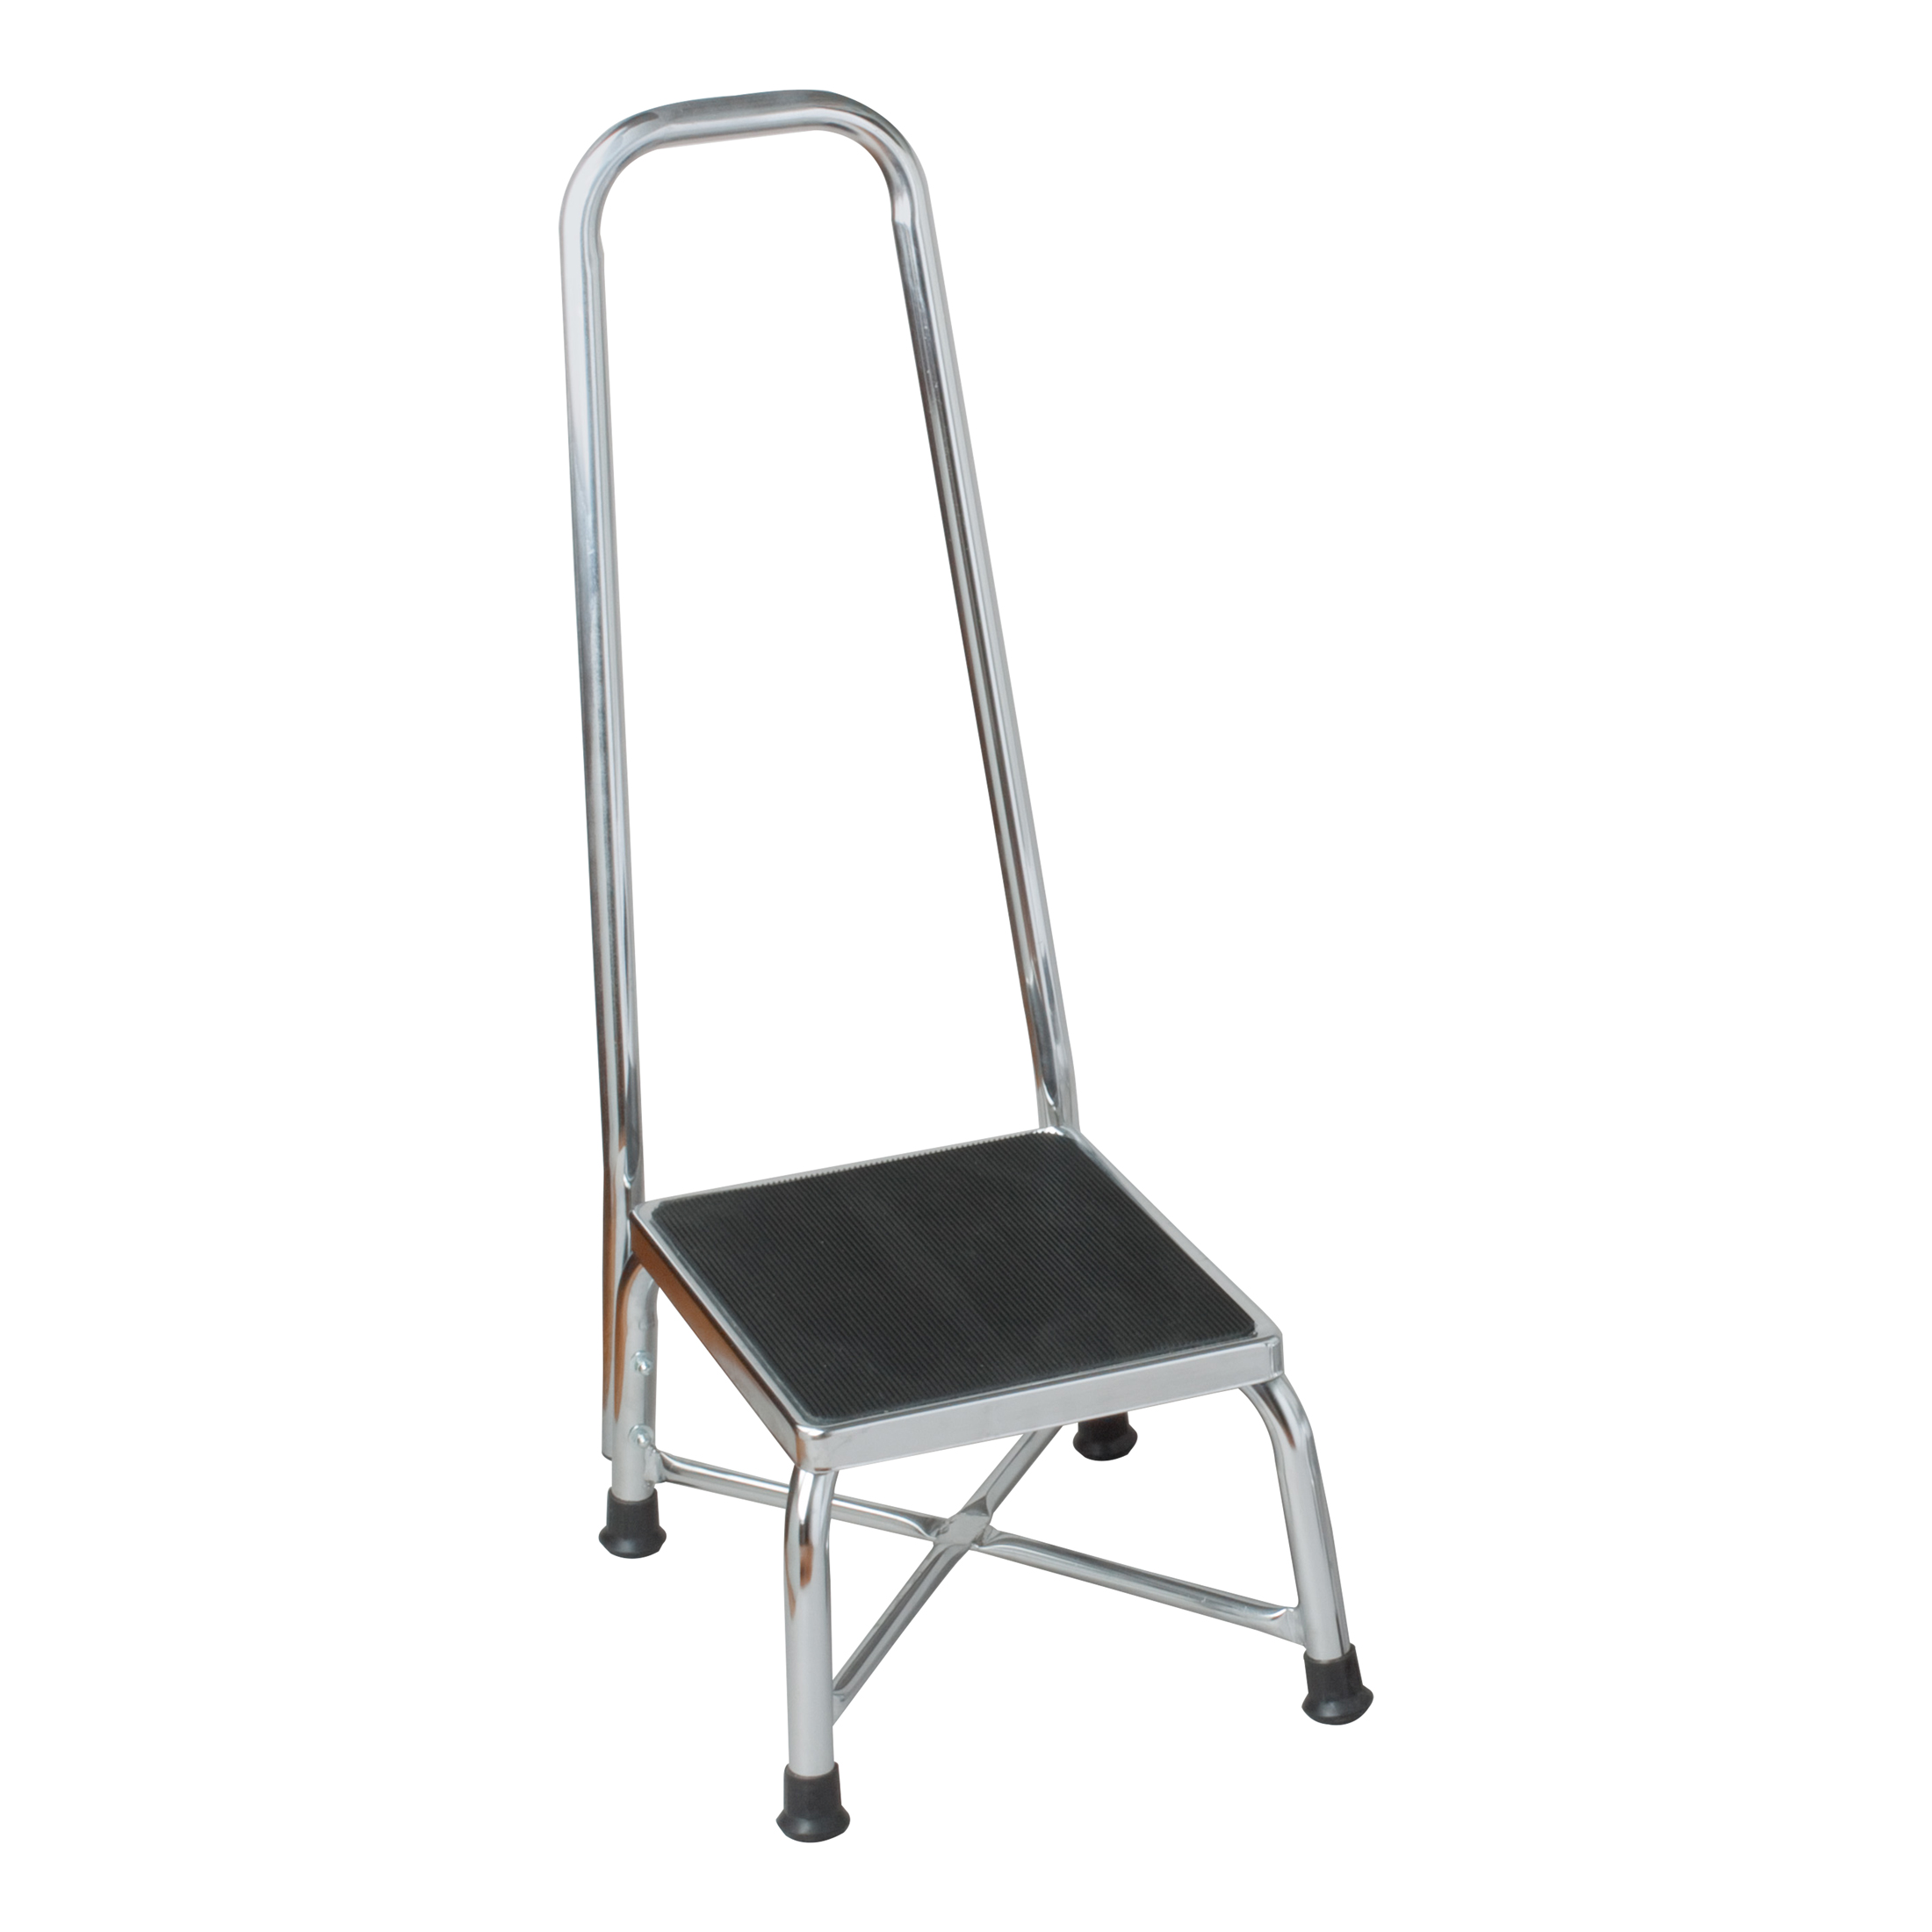 Foot Stools Products, Supplies and Equipment